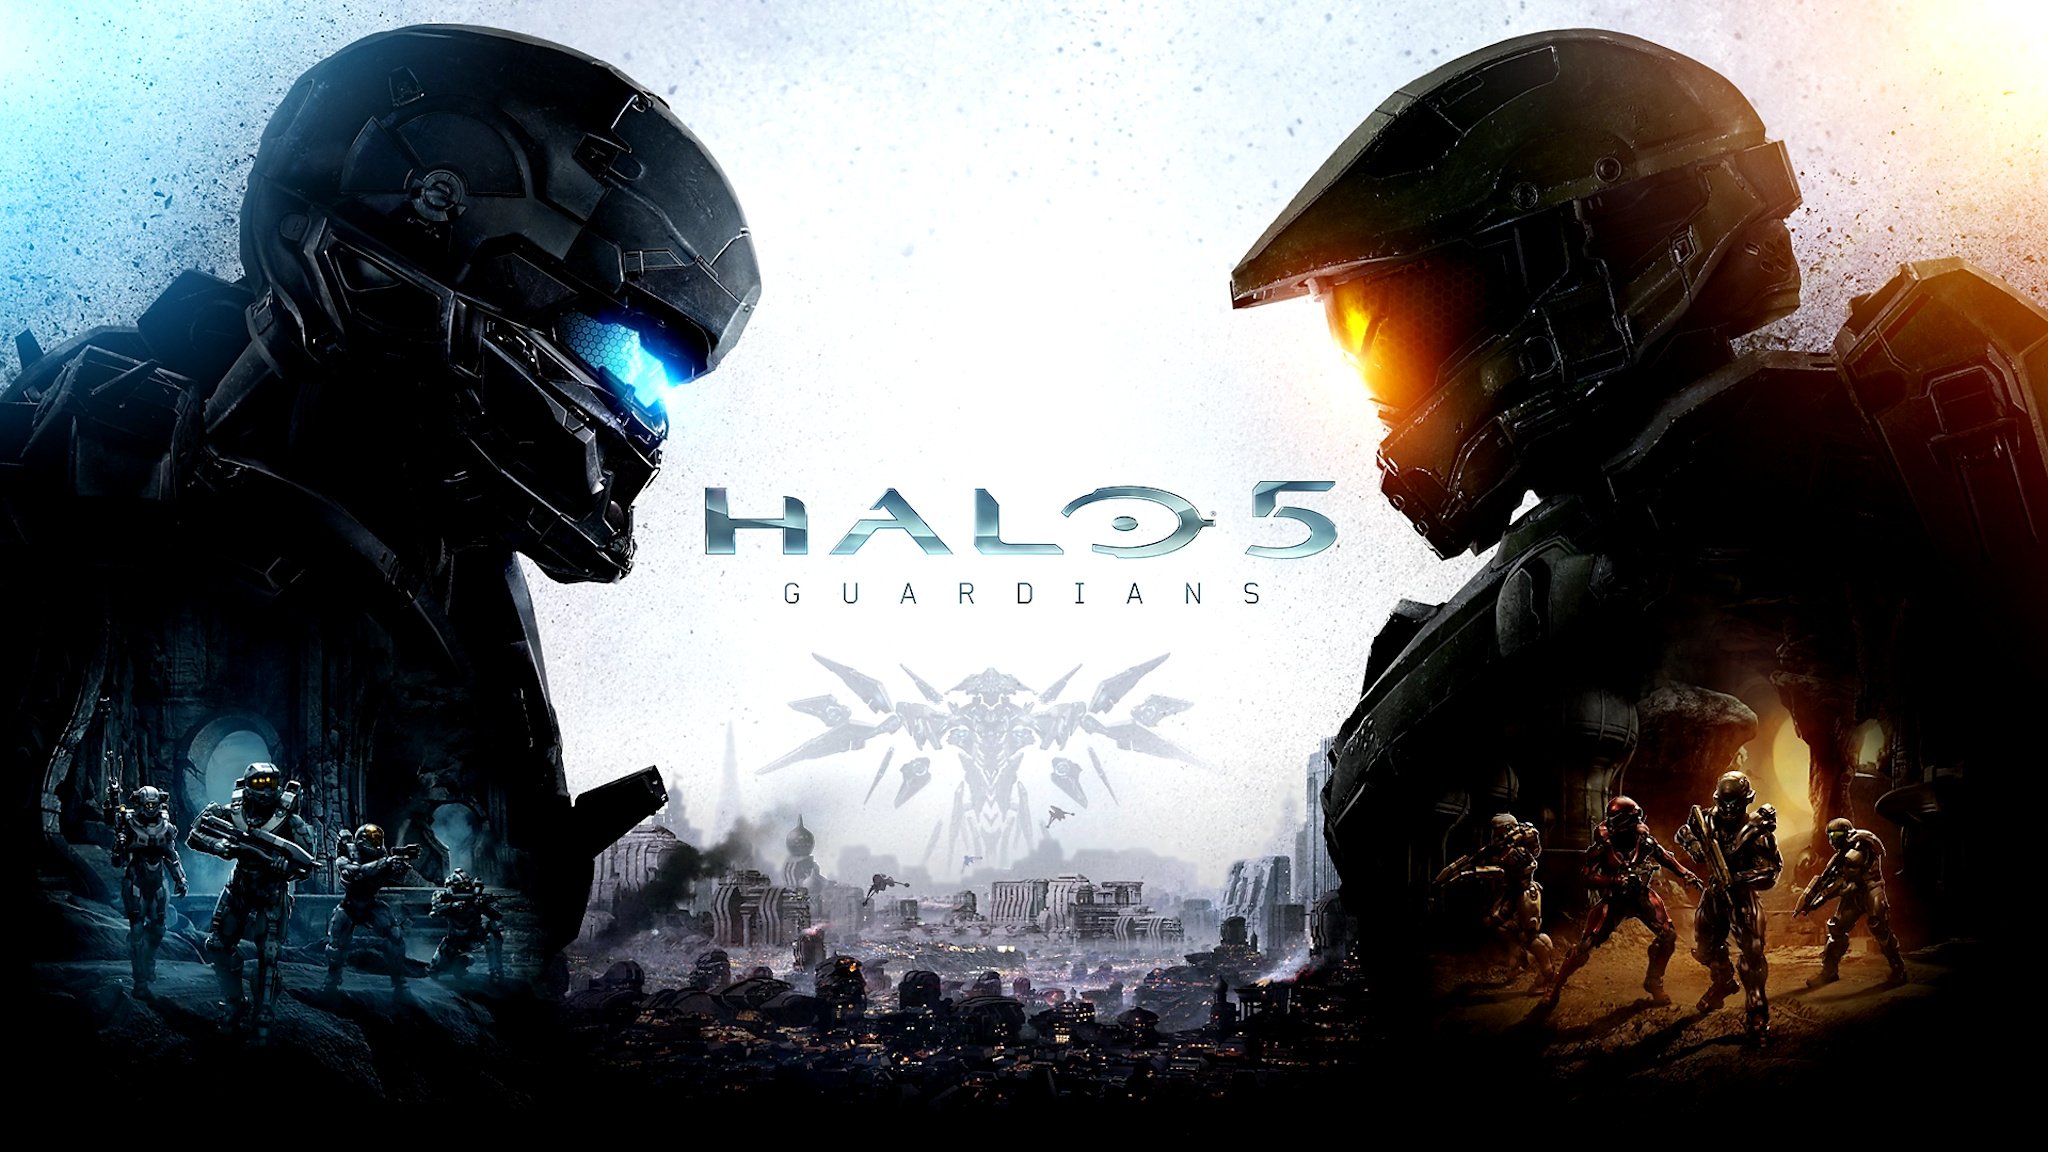 Image result for halo 5 guardians